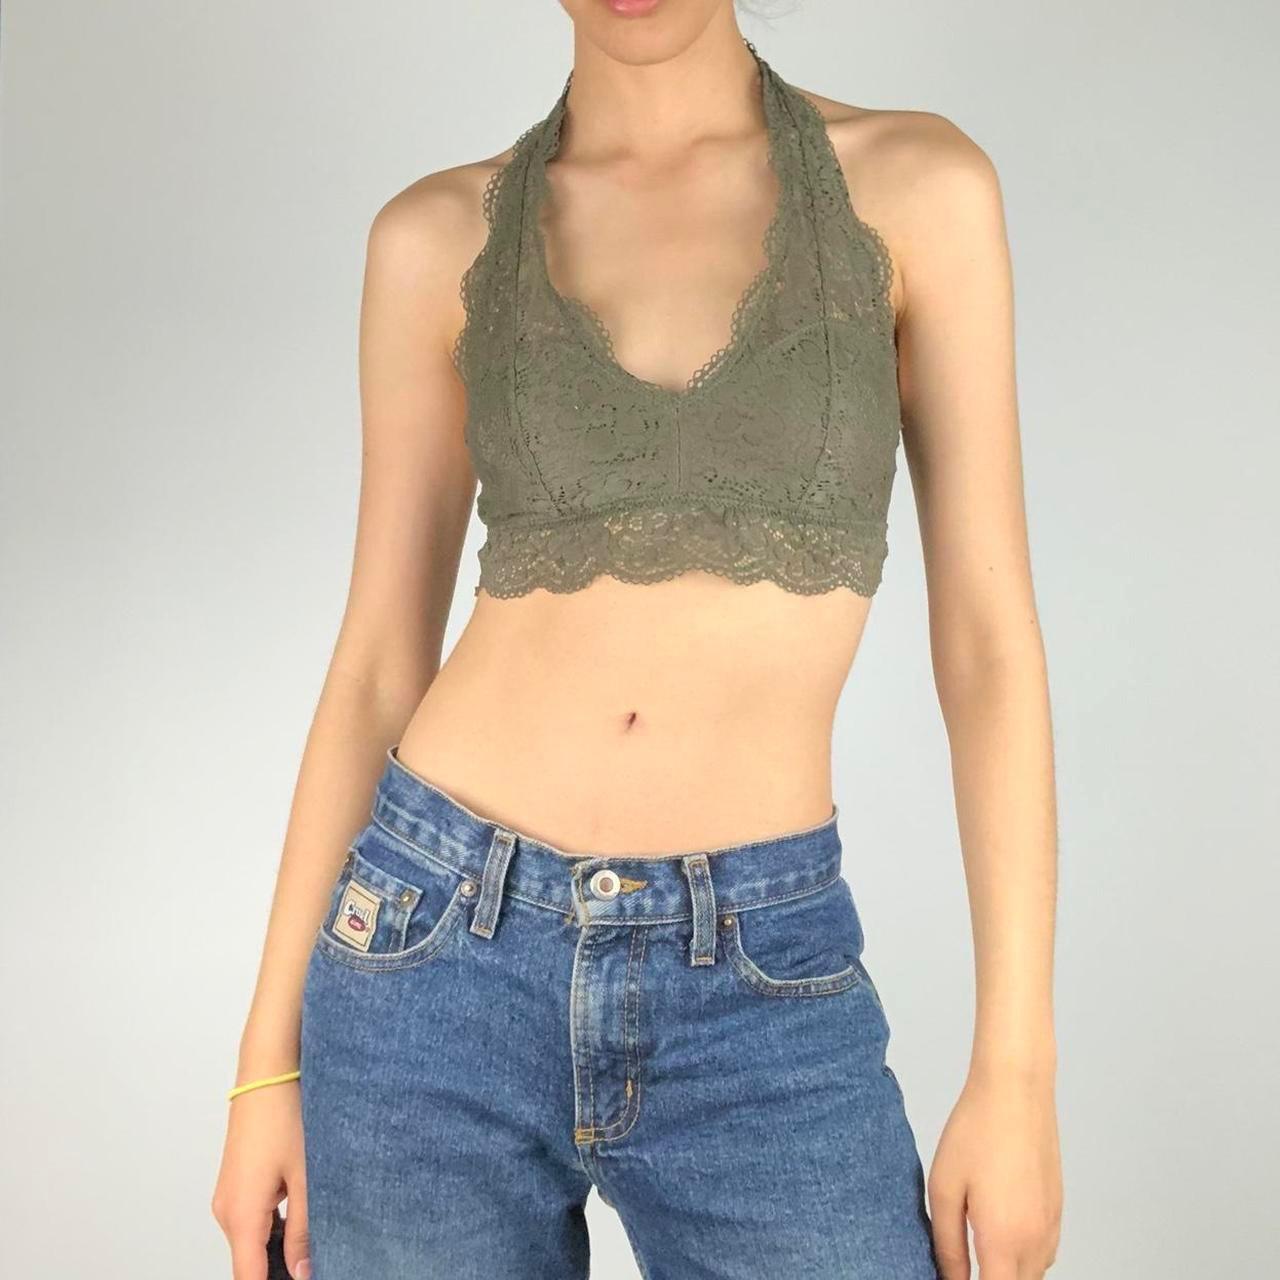 Product Image 1 - Olive green lace bralette

This beauty